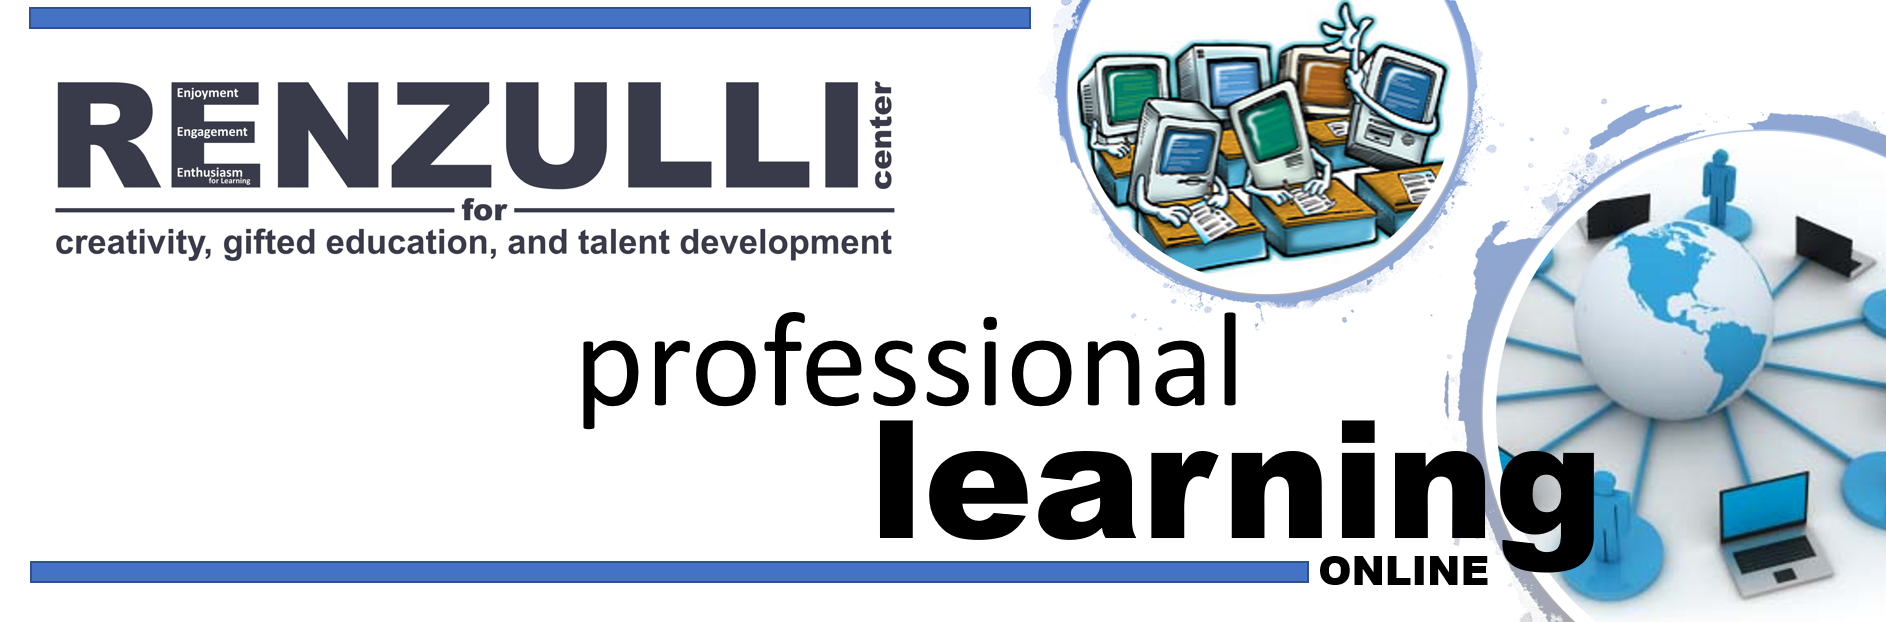 Graphic for Professional Learning Online